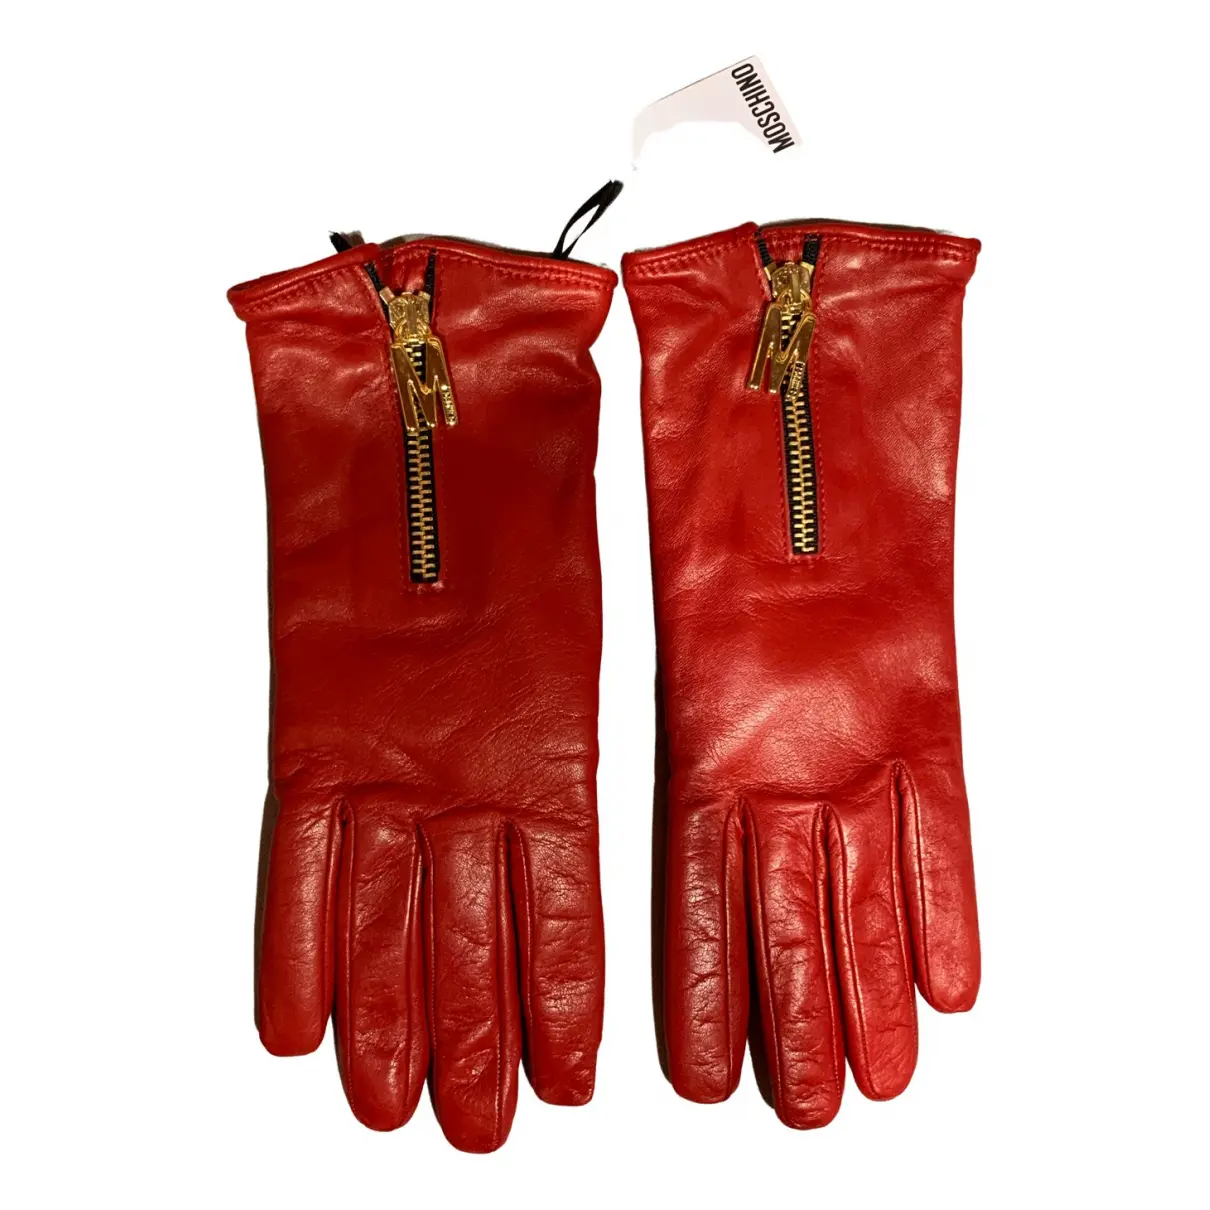 Leather gloves Moschino